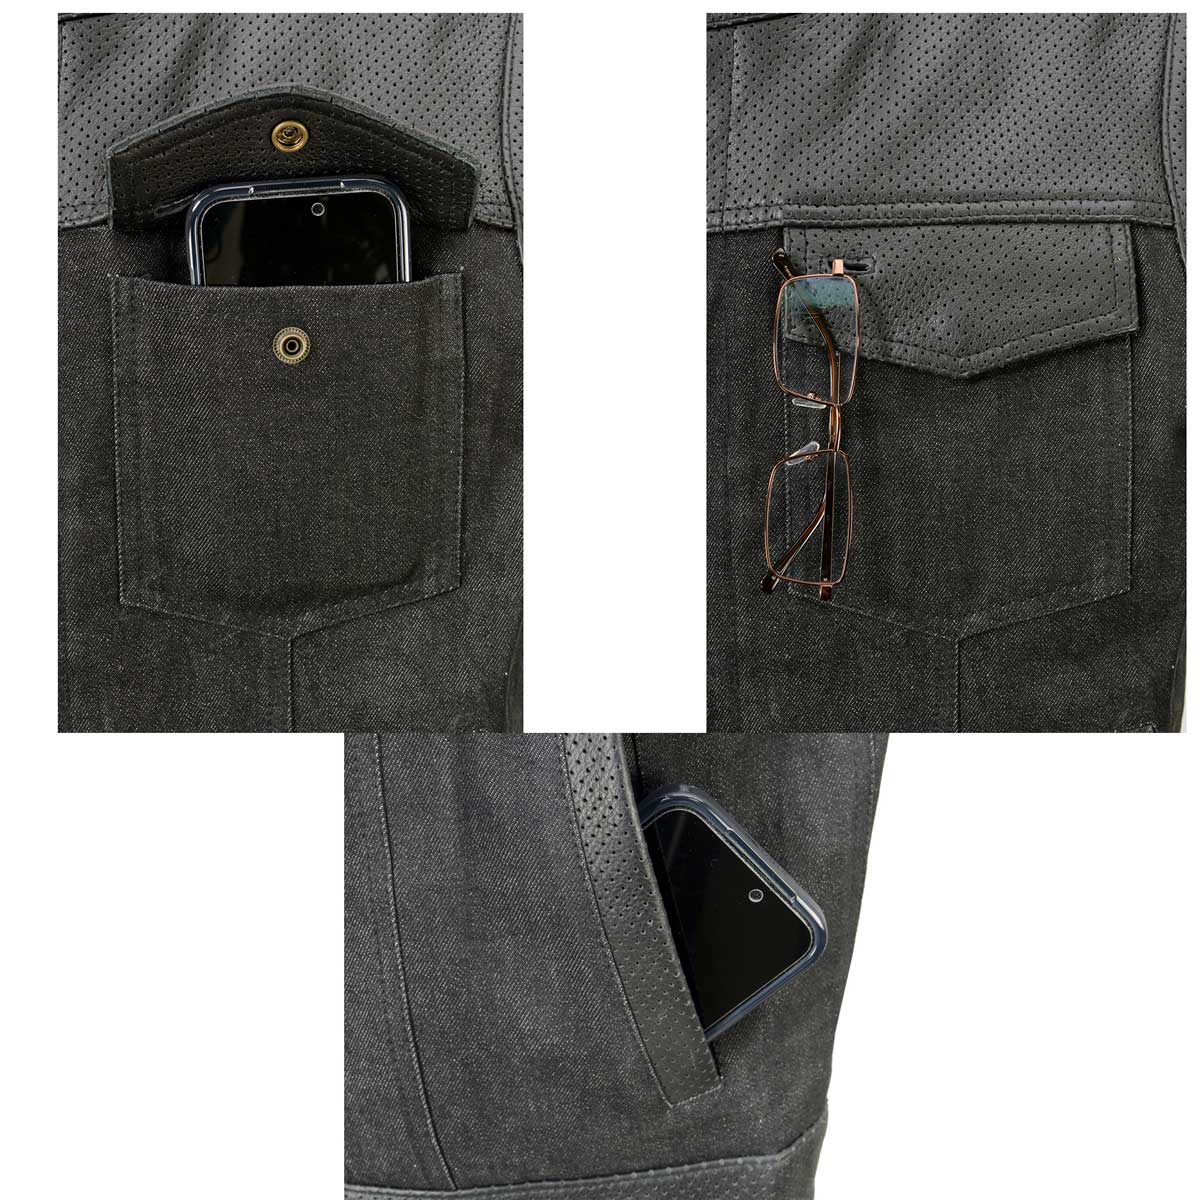 Milwaukee Leather MDM3008 Men's 'Brute' Black Perforated Leather and Denim Club Style Vest w/ Hidden Dual Closure